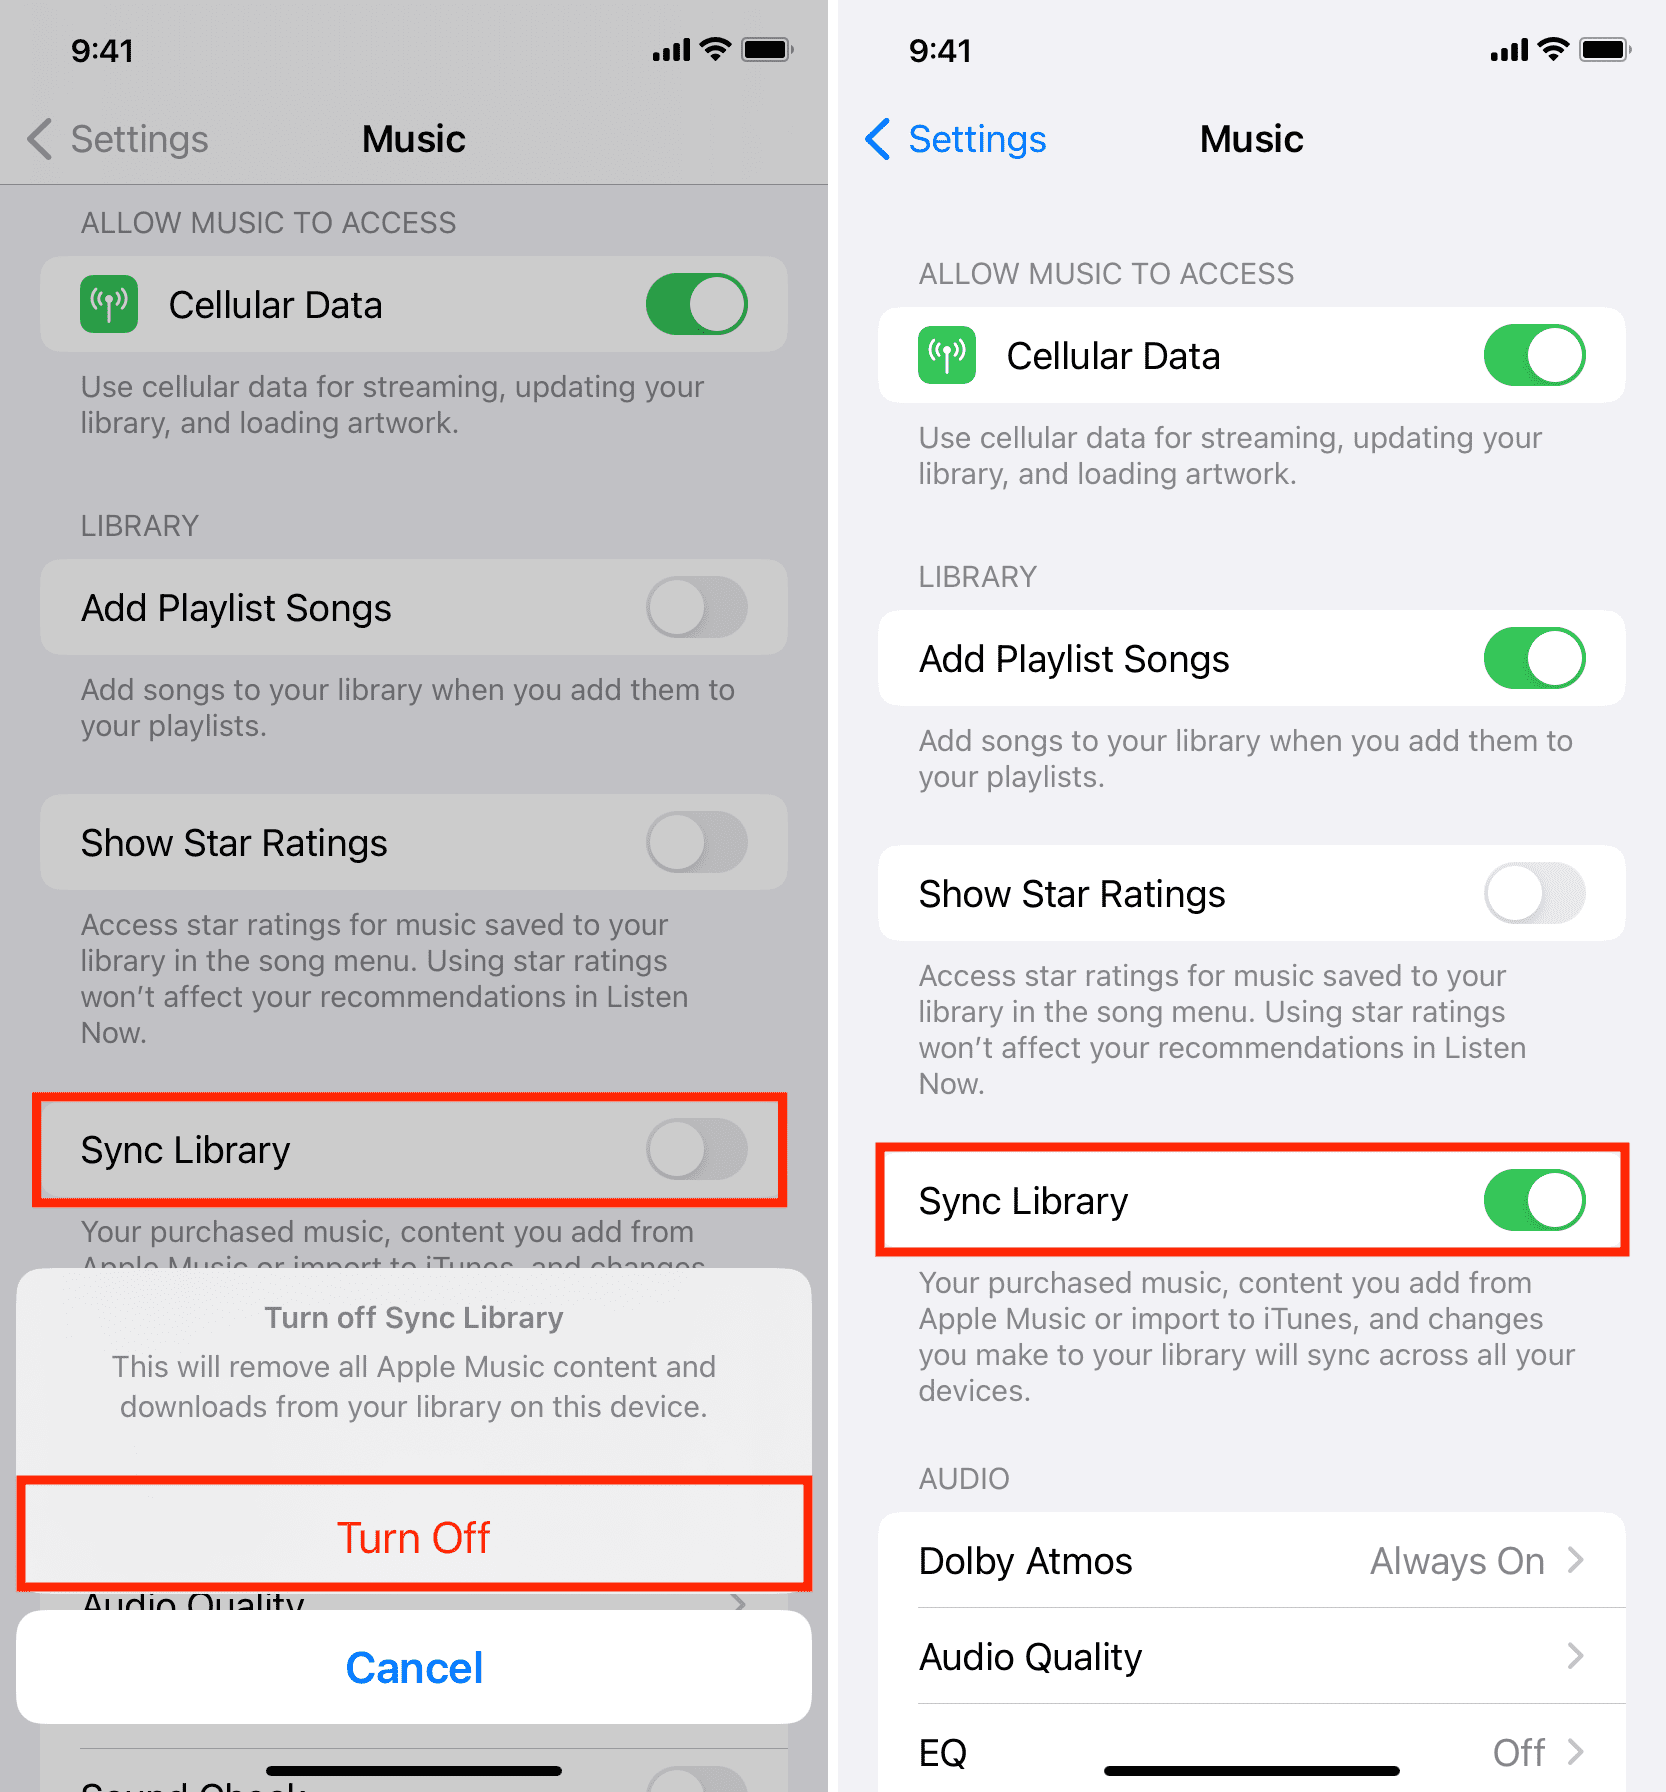 Turn off Sync Library and enable it again in Music settings on iPhone